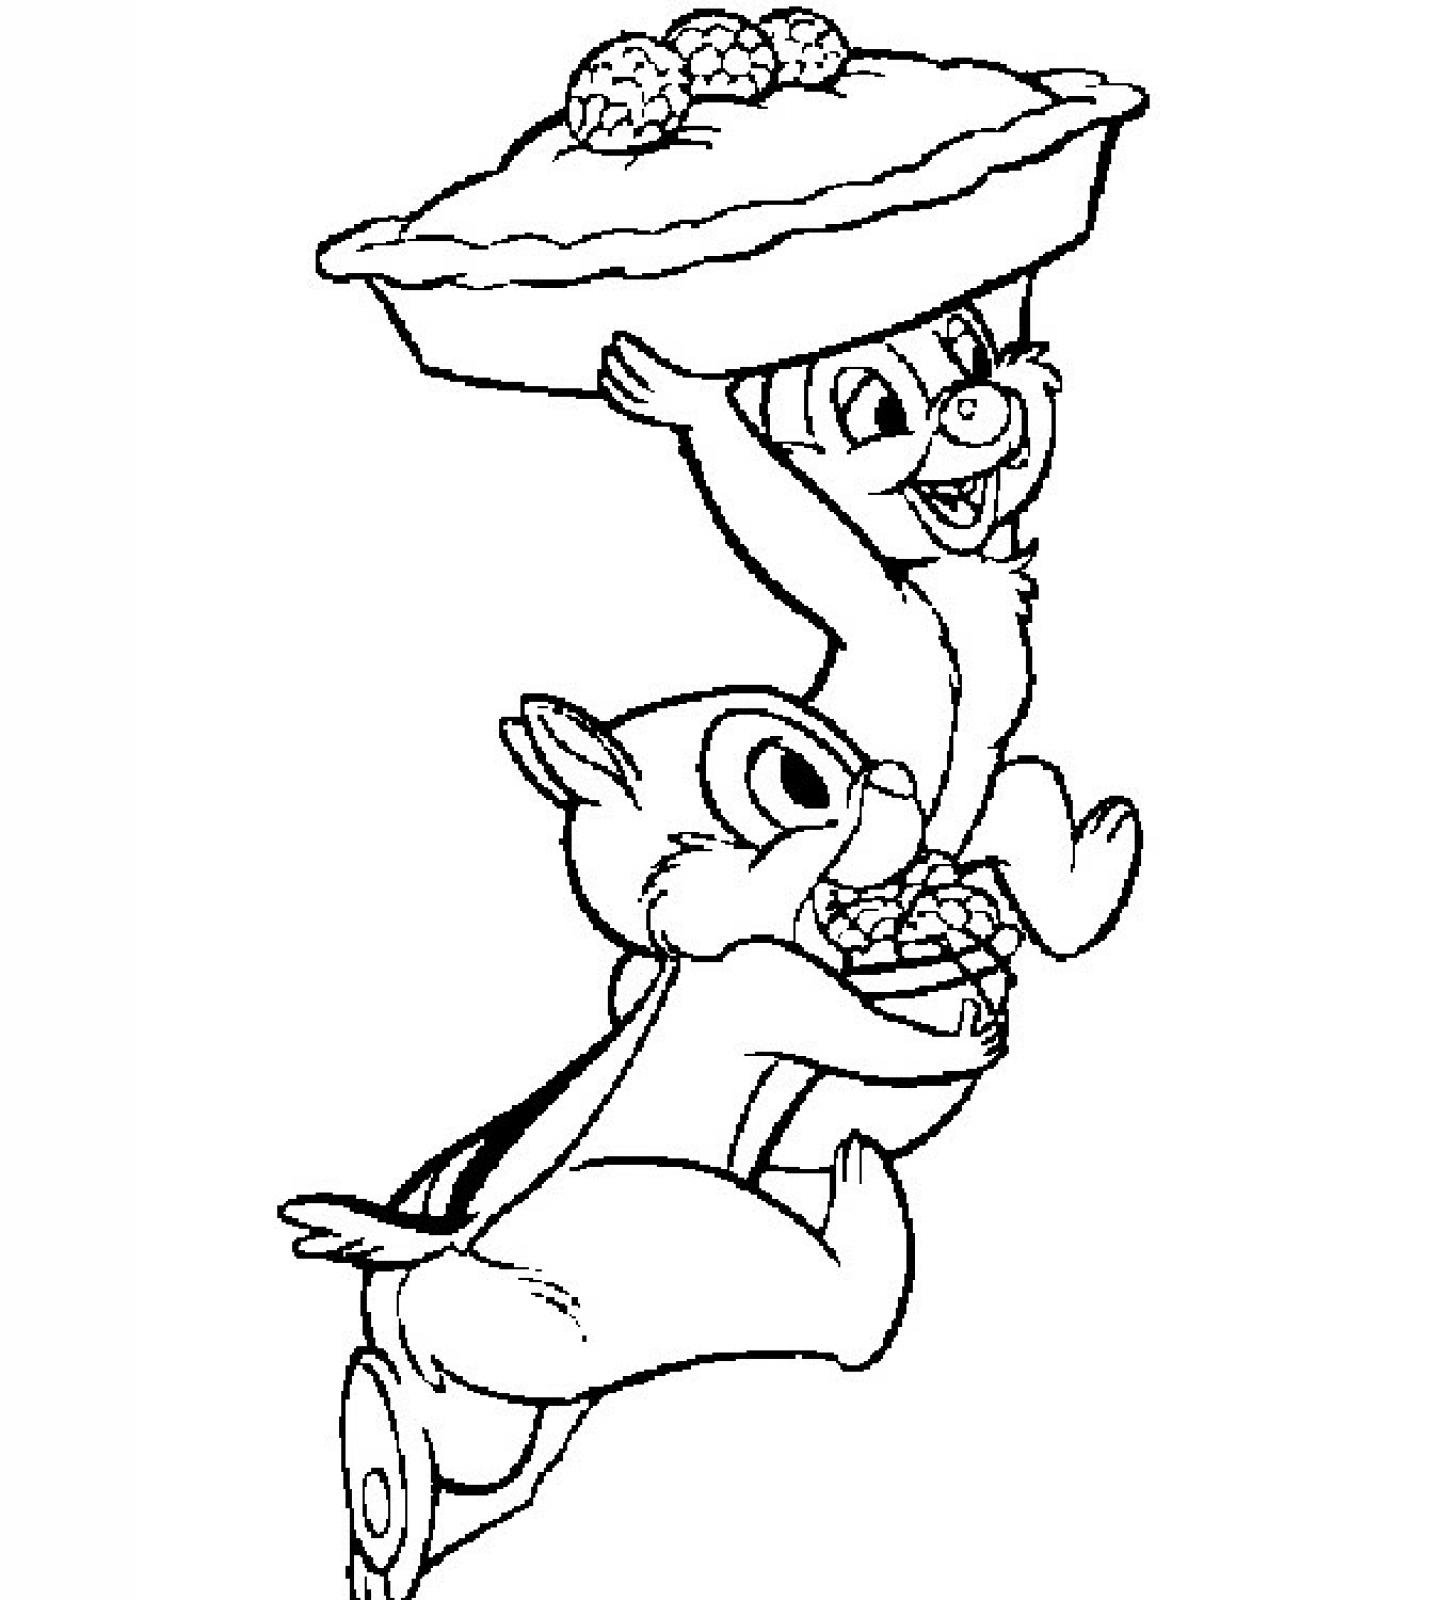 chip-and-dale-coloring-pages-to-download-and-print-for-free